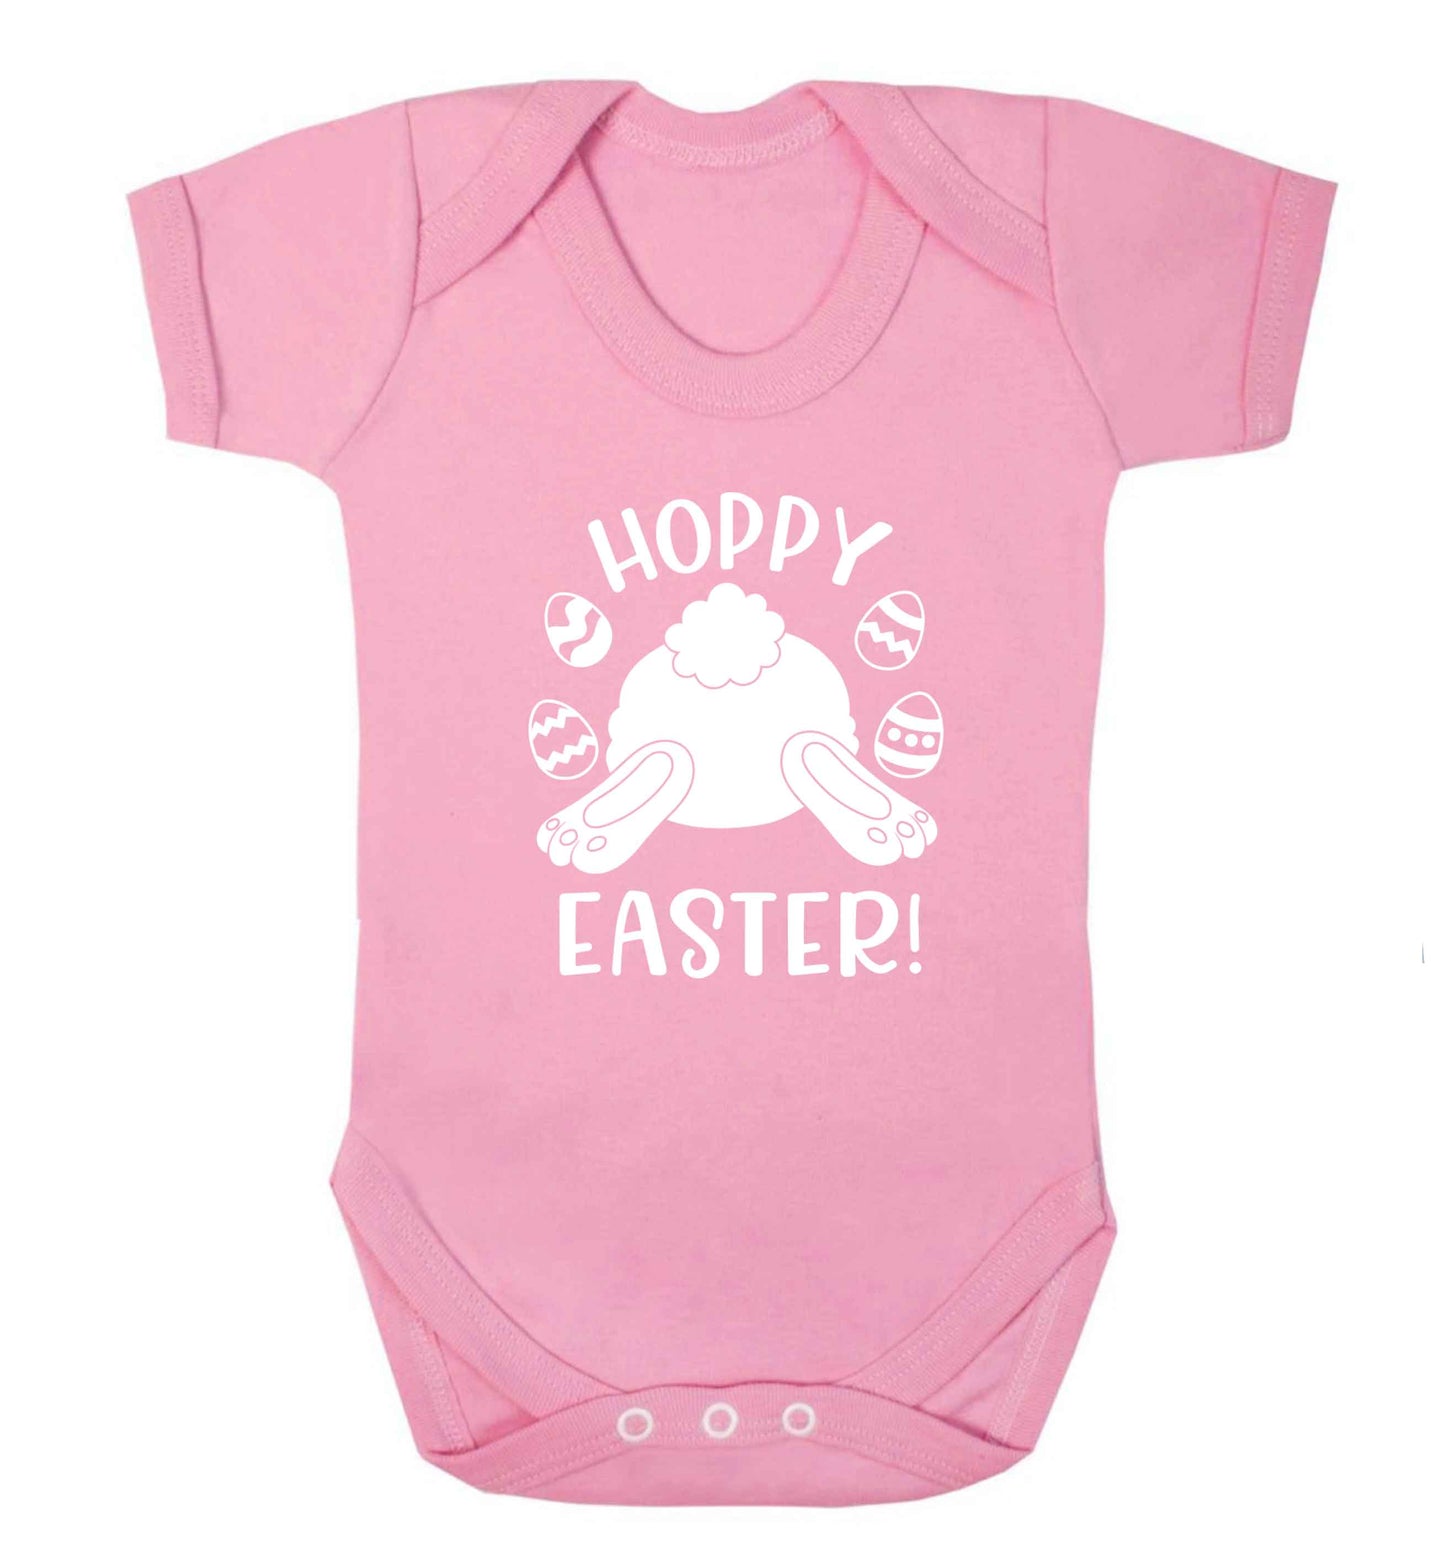 Hoppy Easter baby vest pale pink 18-24 months